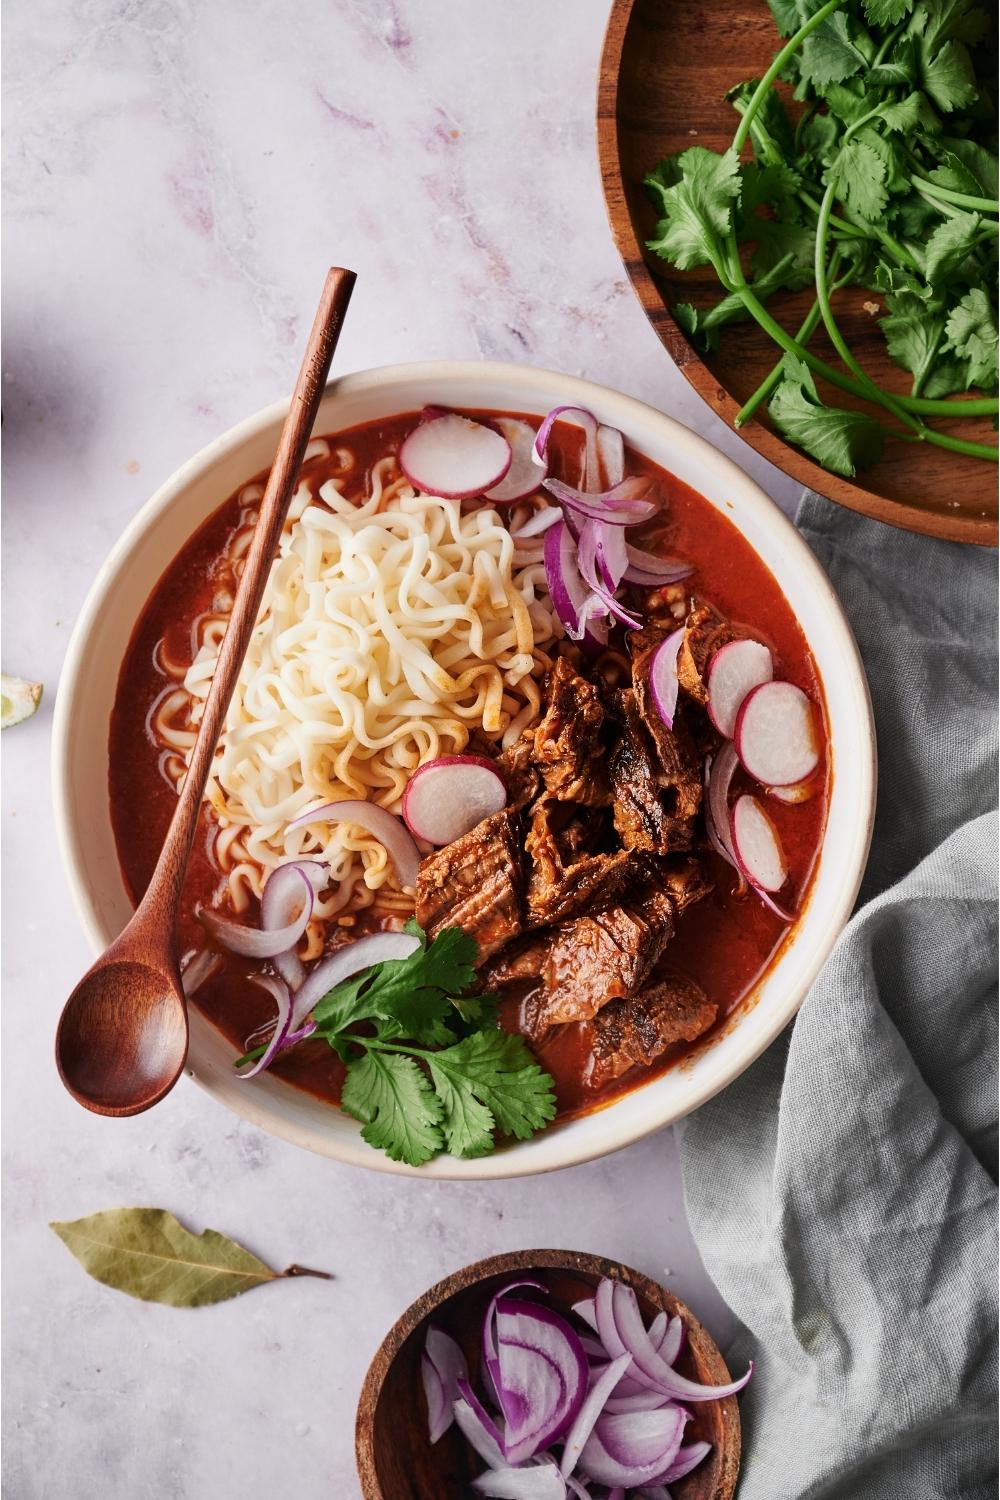 Birria ramen in a white bowl with a spoon, surrounded by an assortment of toppings